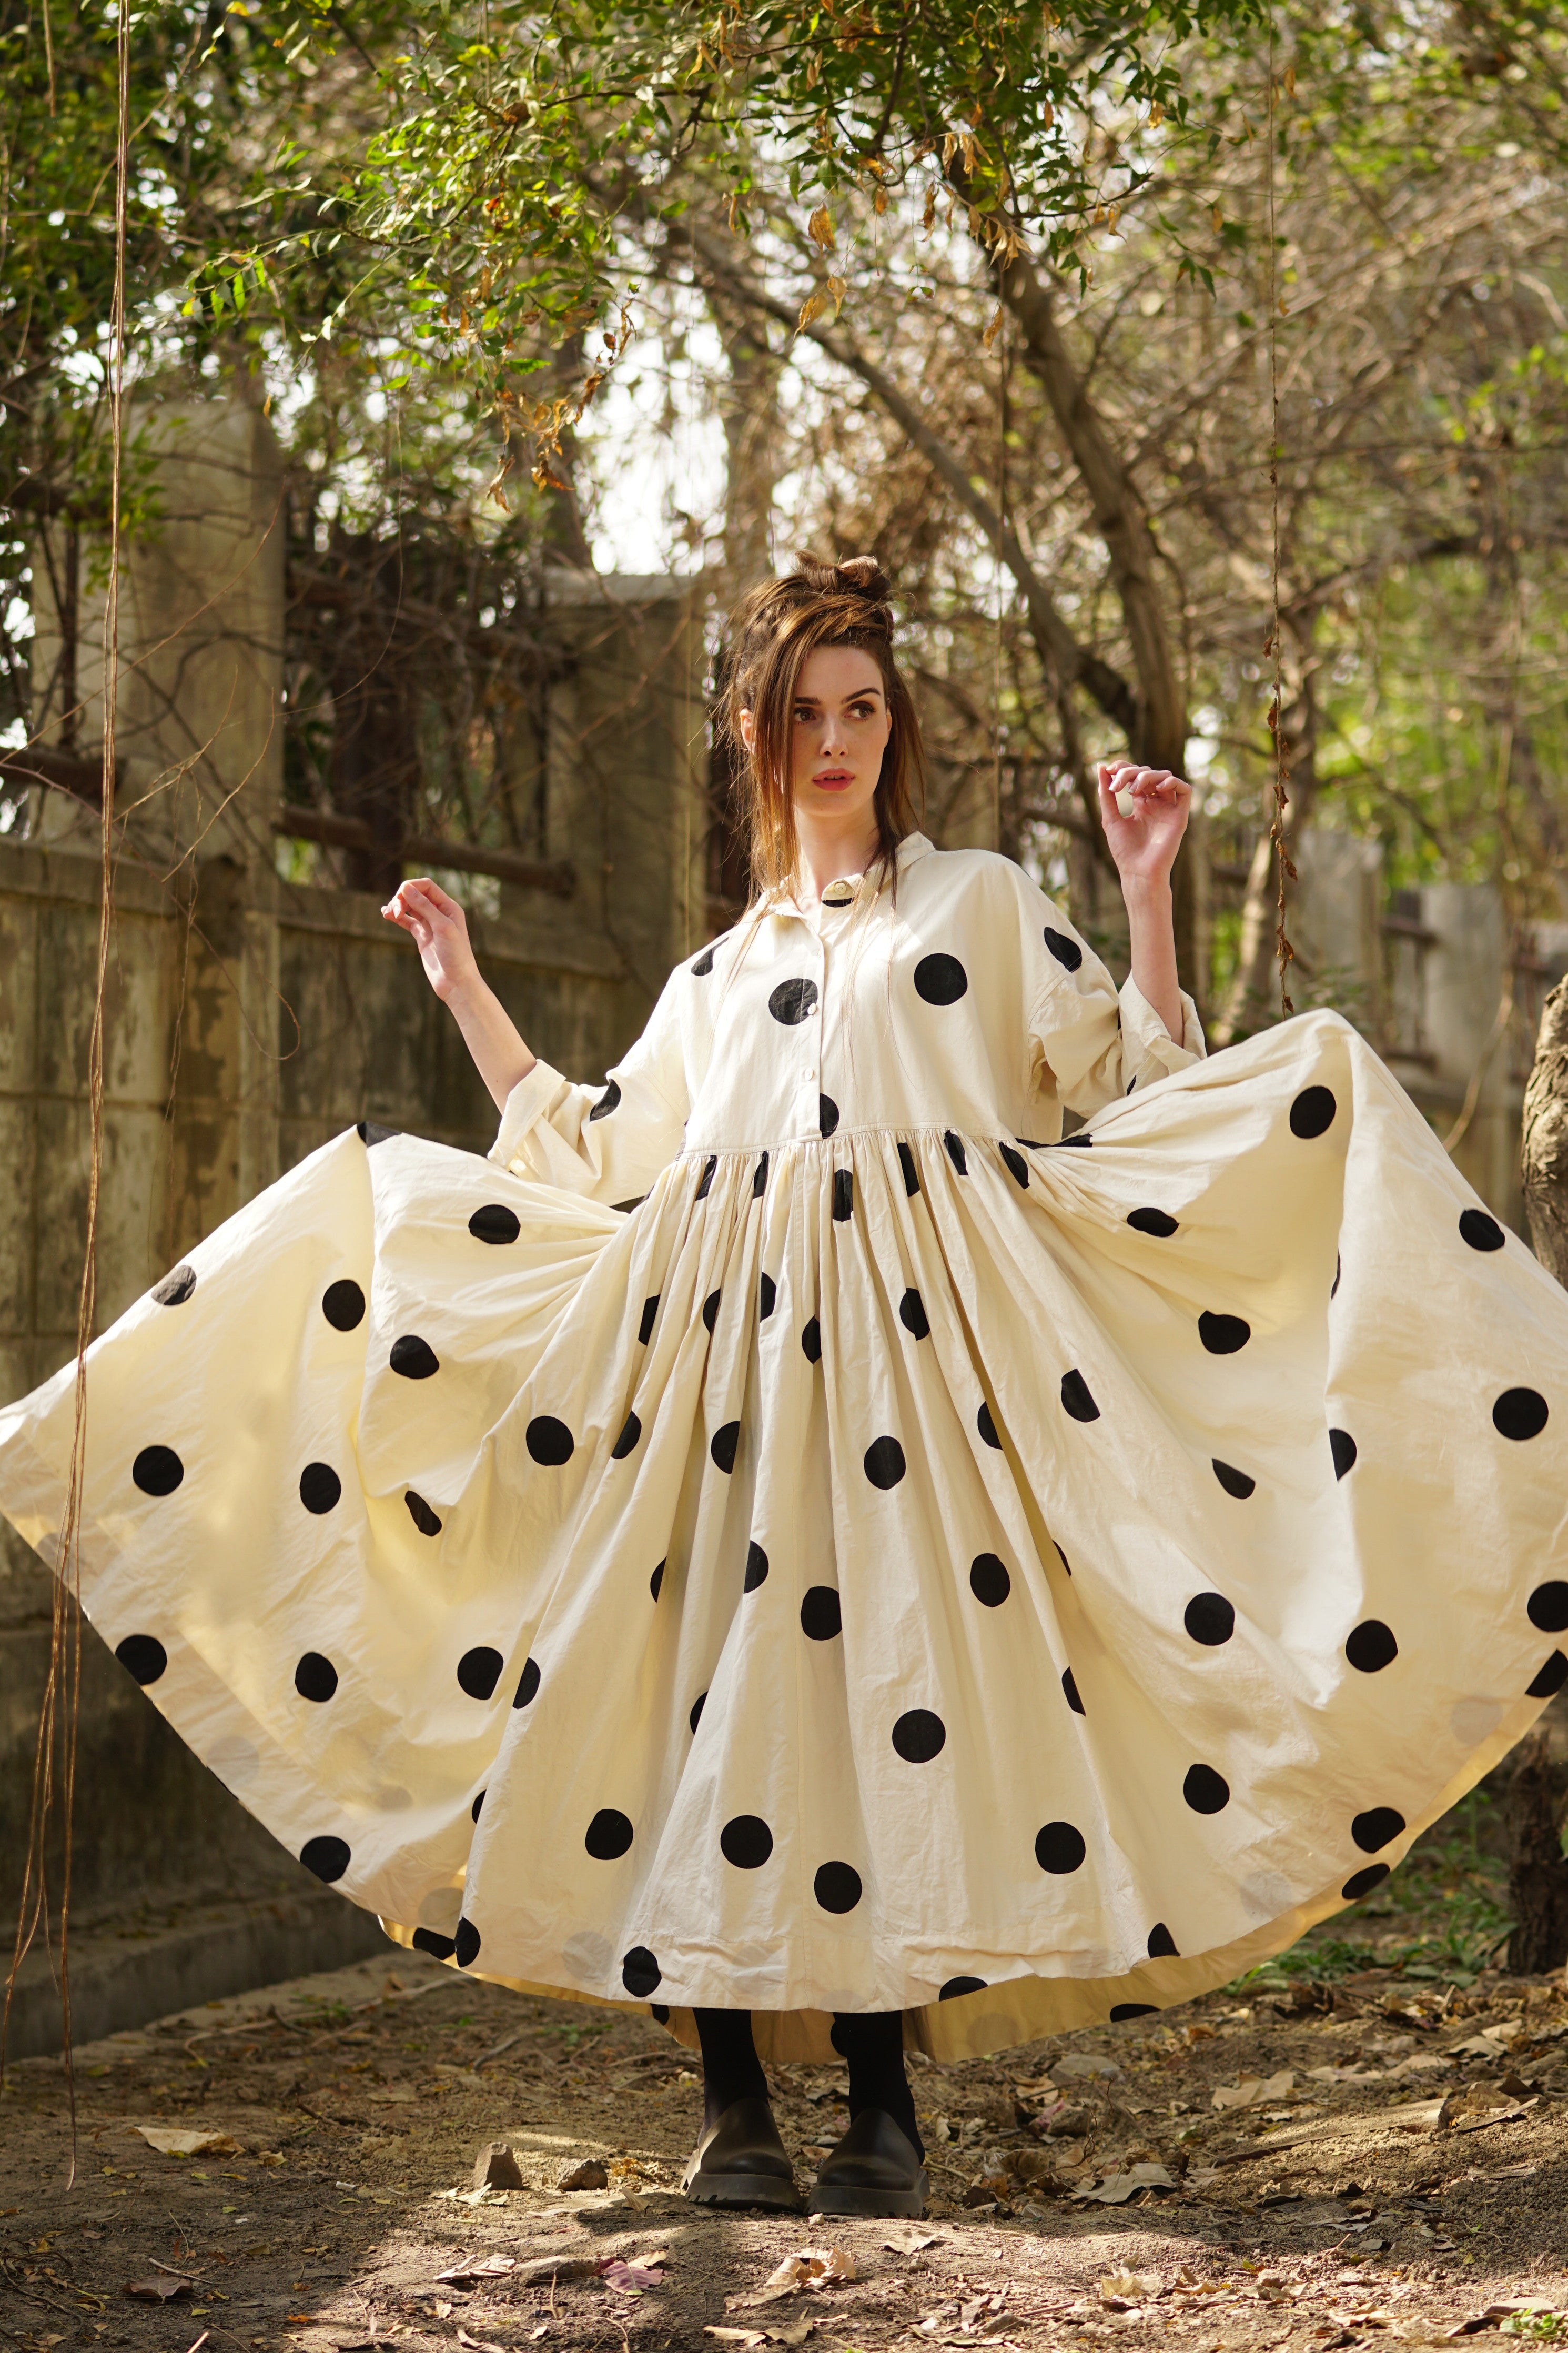 A MegbyDesign model is wearing a long cream dress with large black spots. The dress has side pockets, double stitching and a tiny collar to accent and give detail to the bodice.